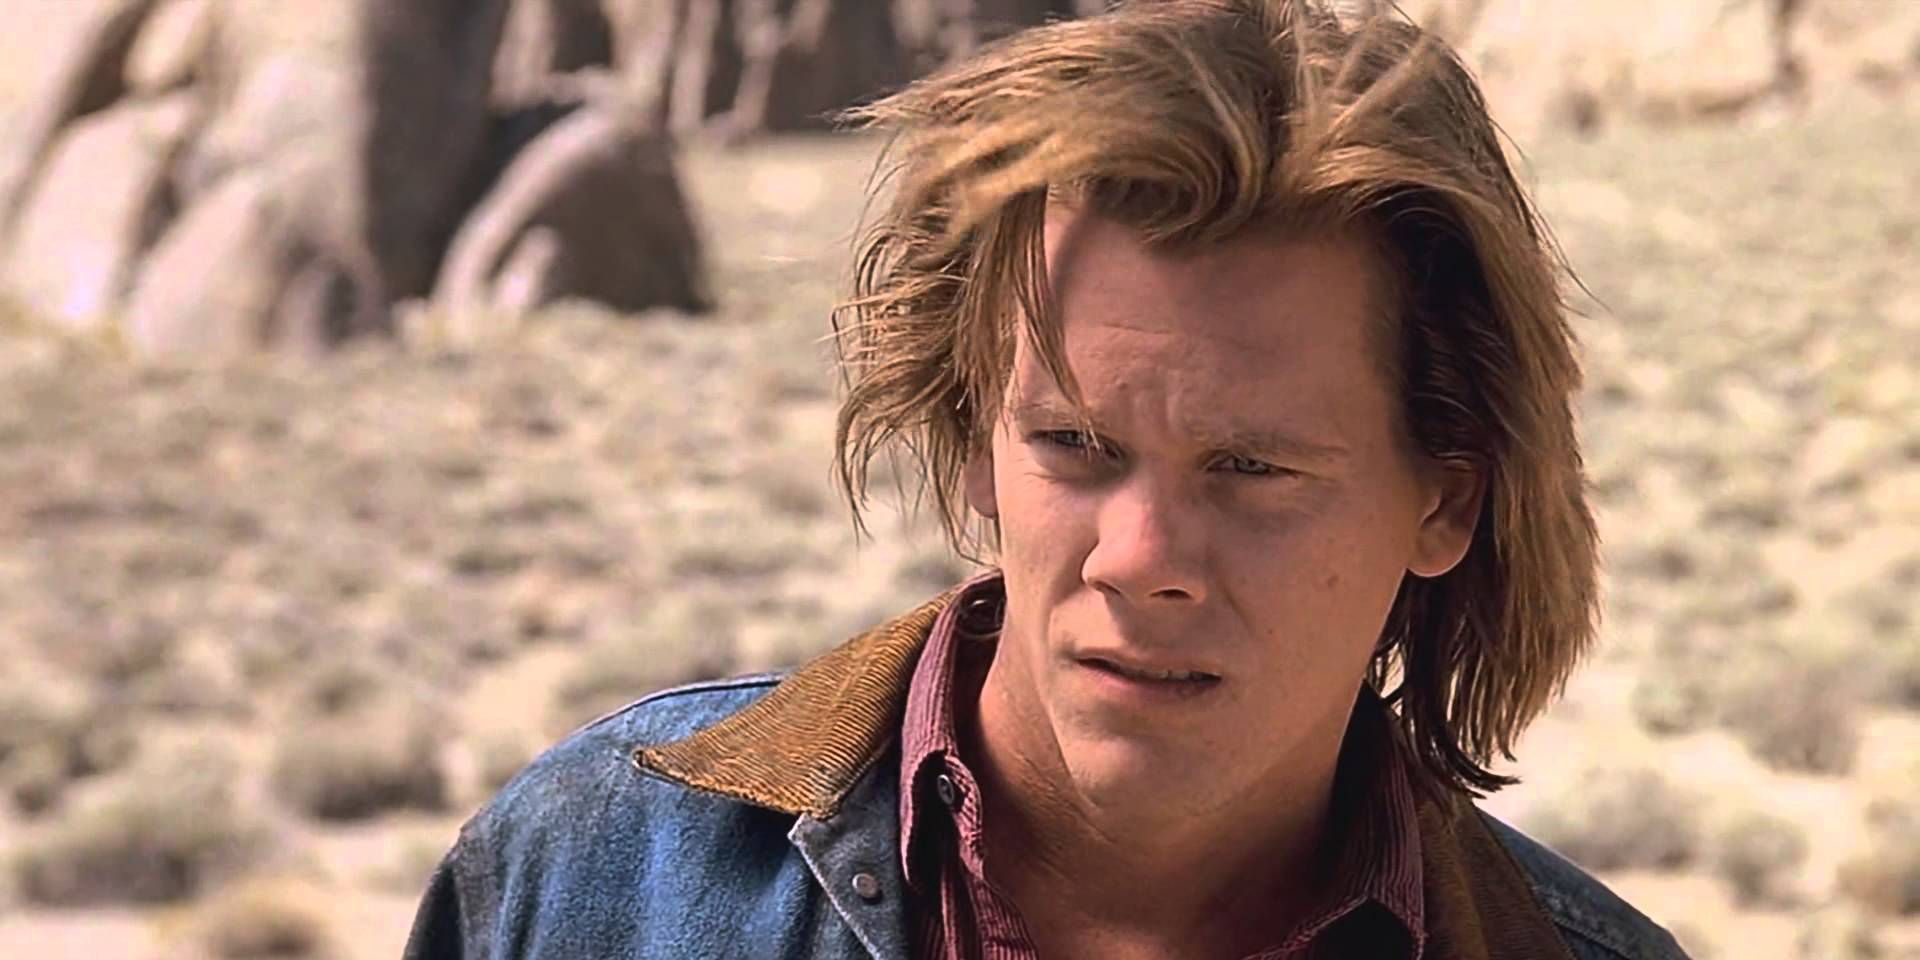 Kevin Bacon as Valentine "Val" McKee